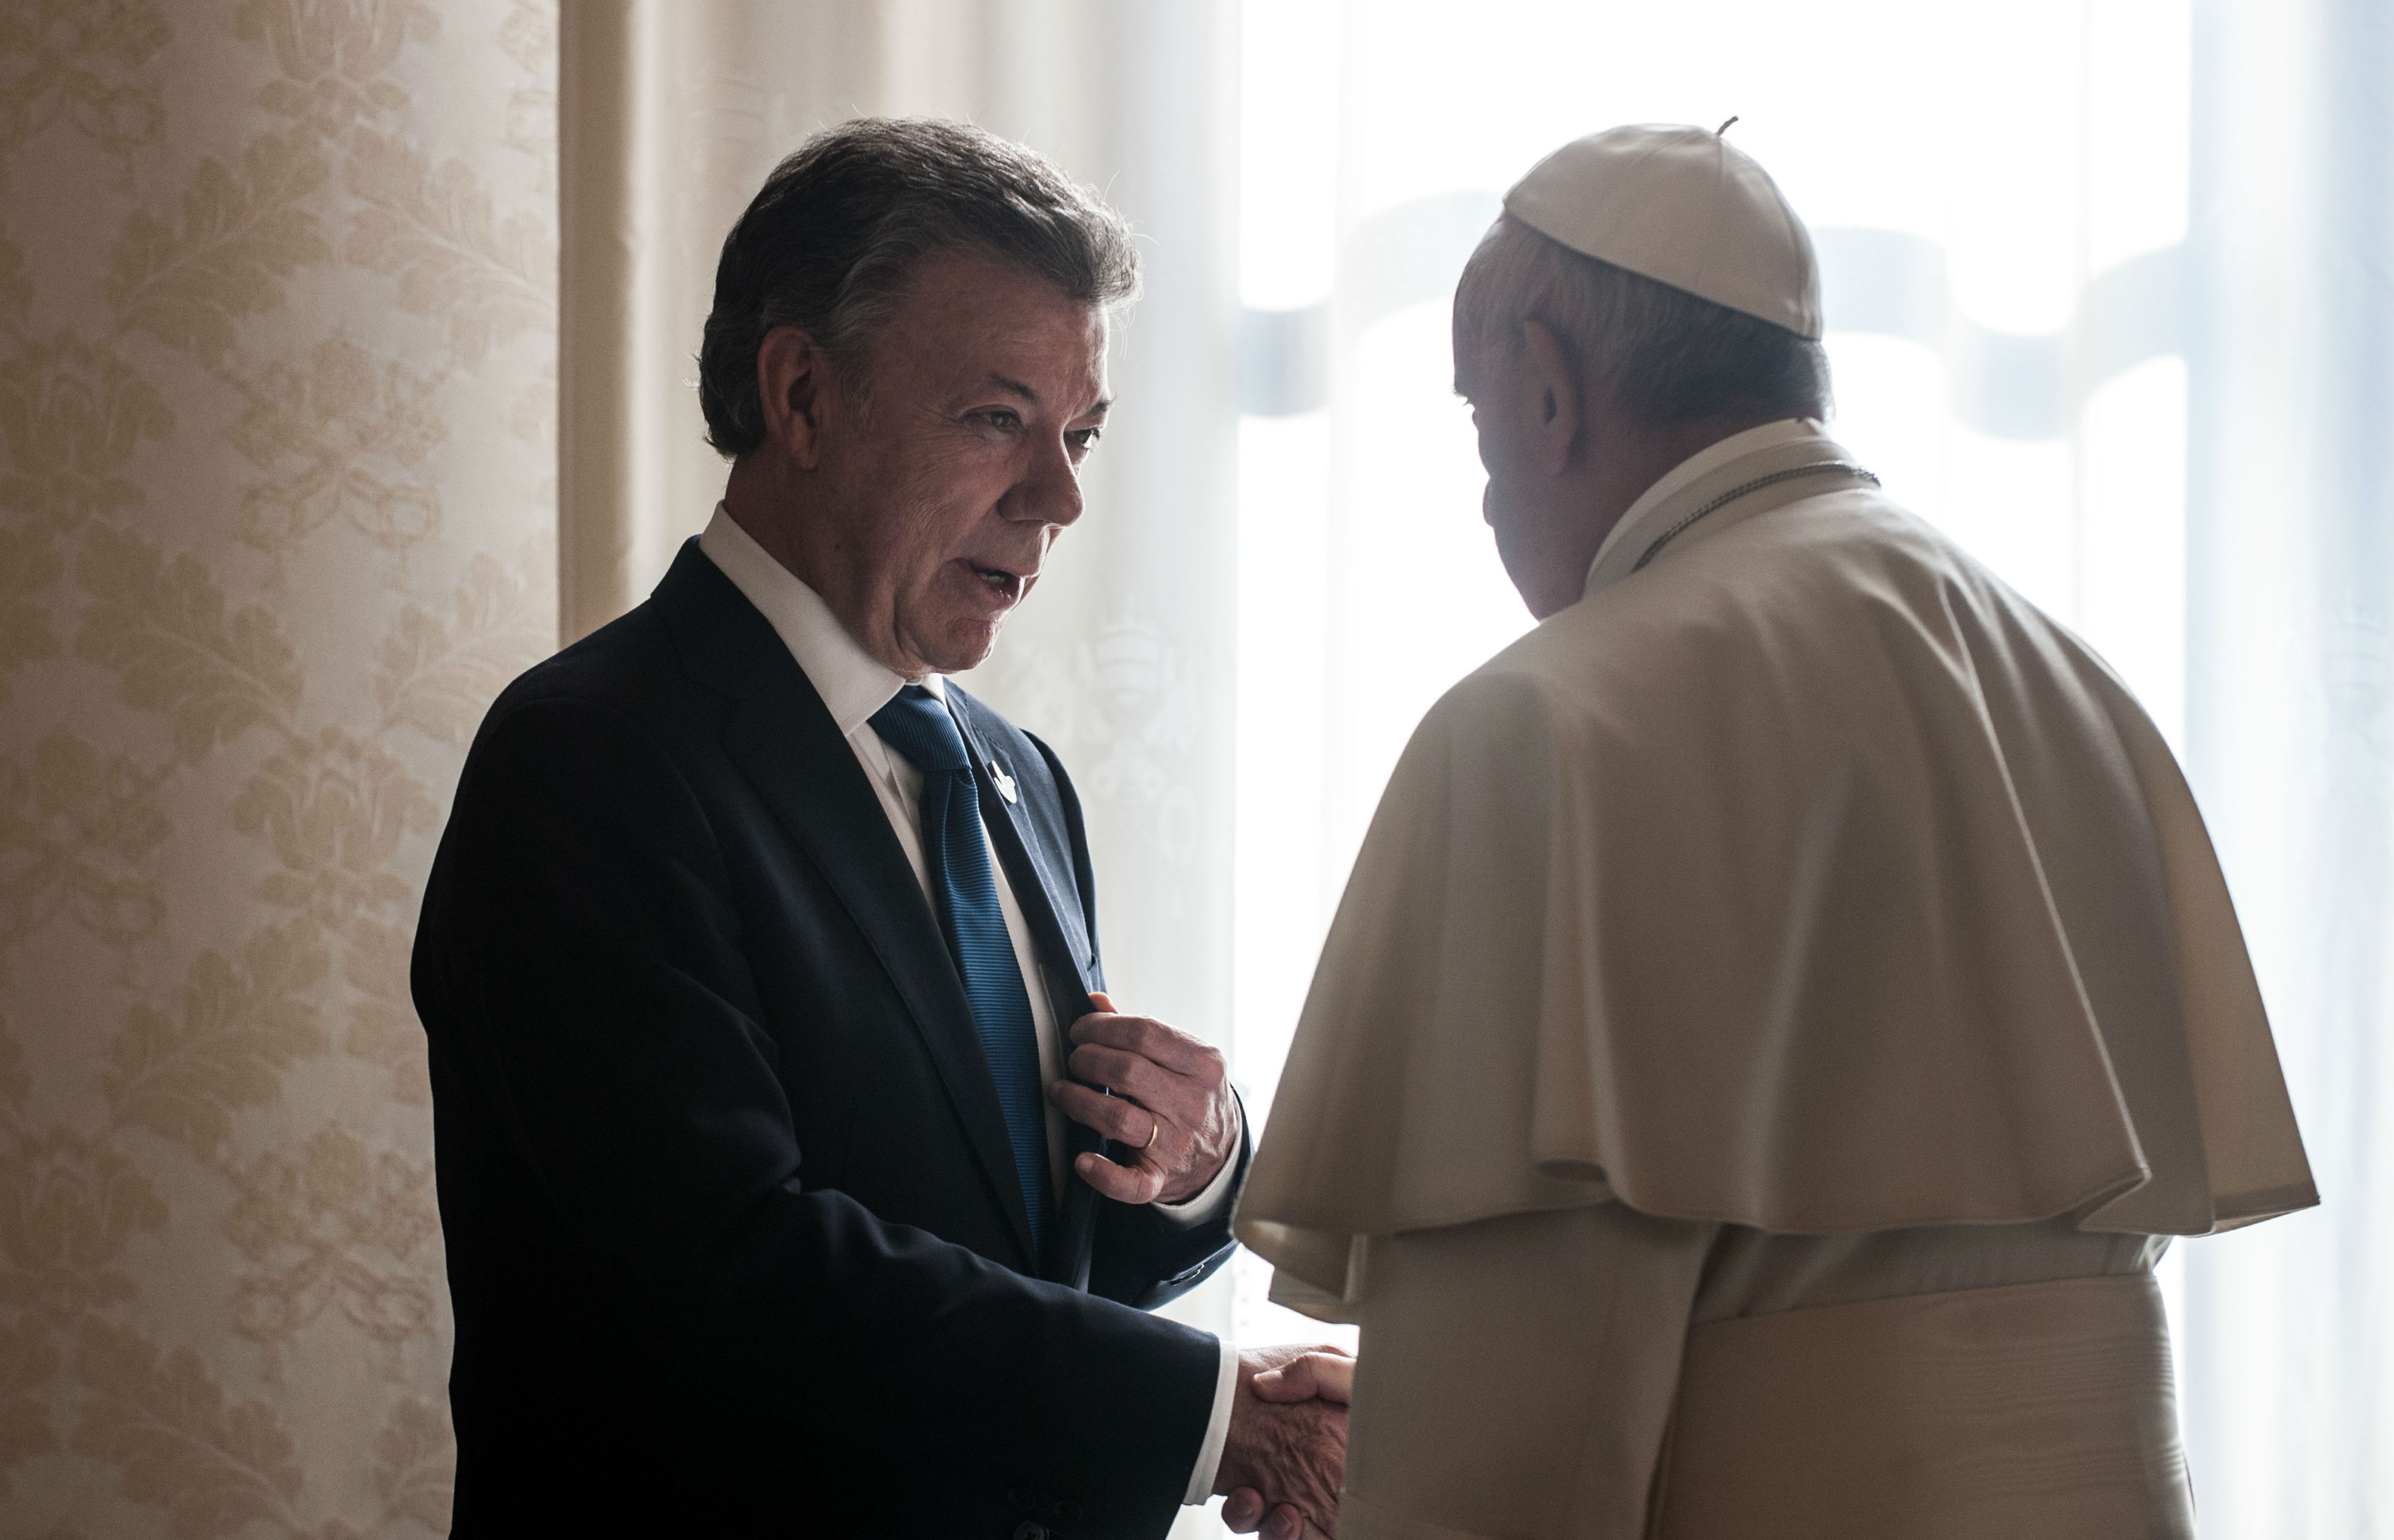 Pope meets with Colombian leaders at odds on FARC peace deal